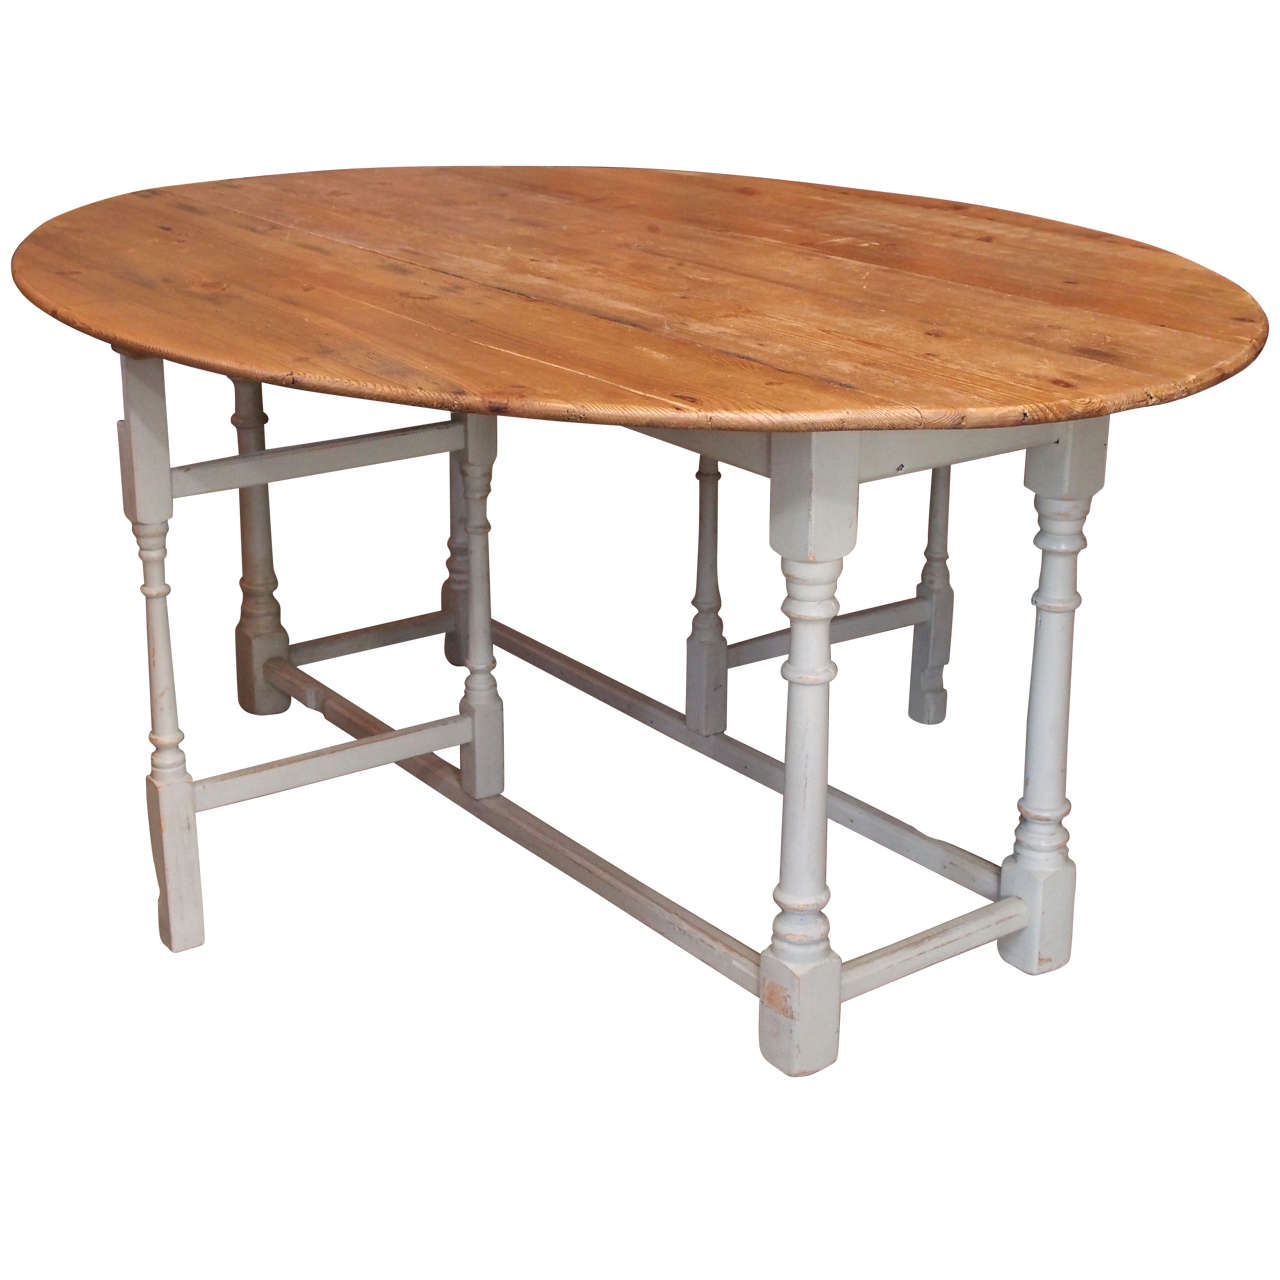 19th Century Painted Drop Leaf Table For Sale